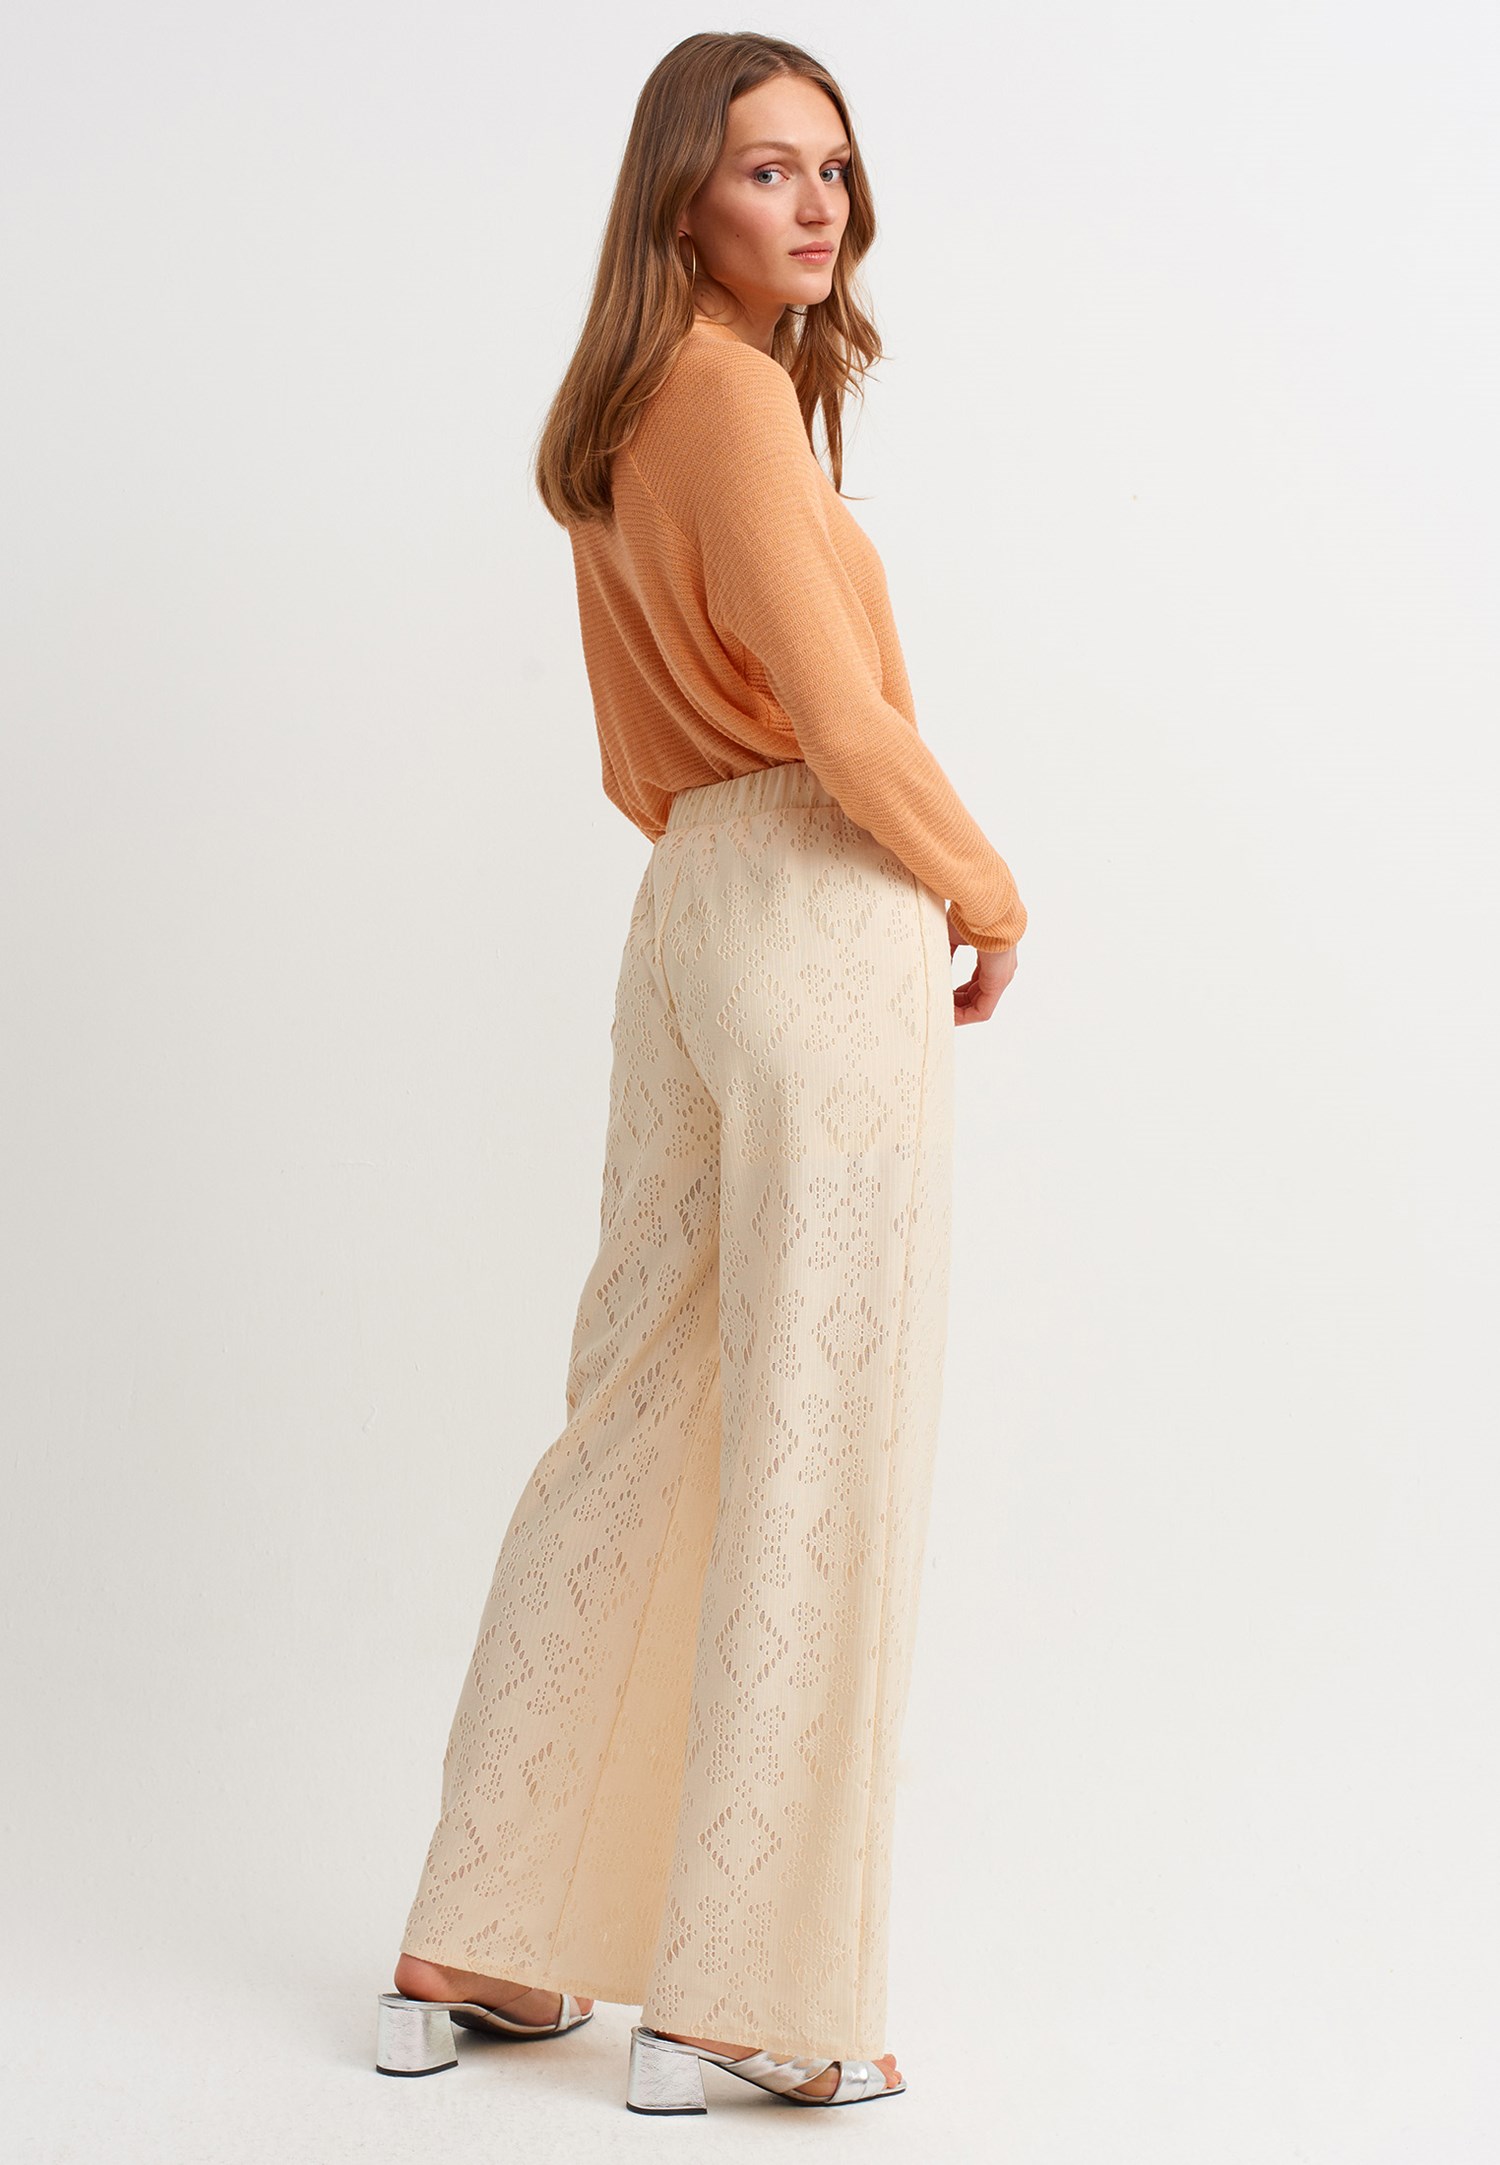 Women Beige Wide Pants with Button Details